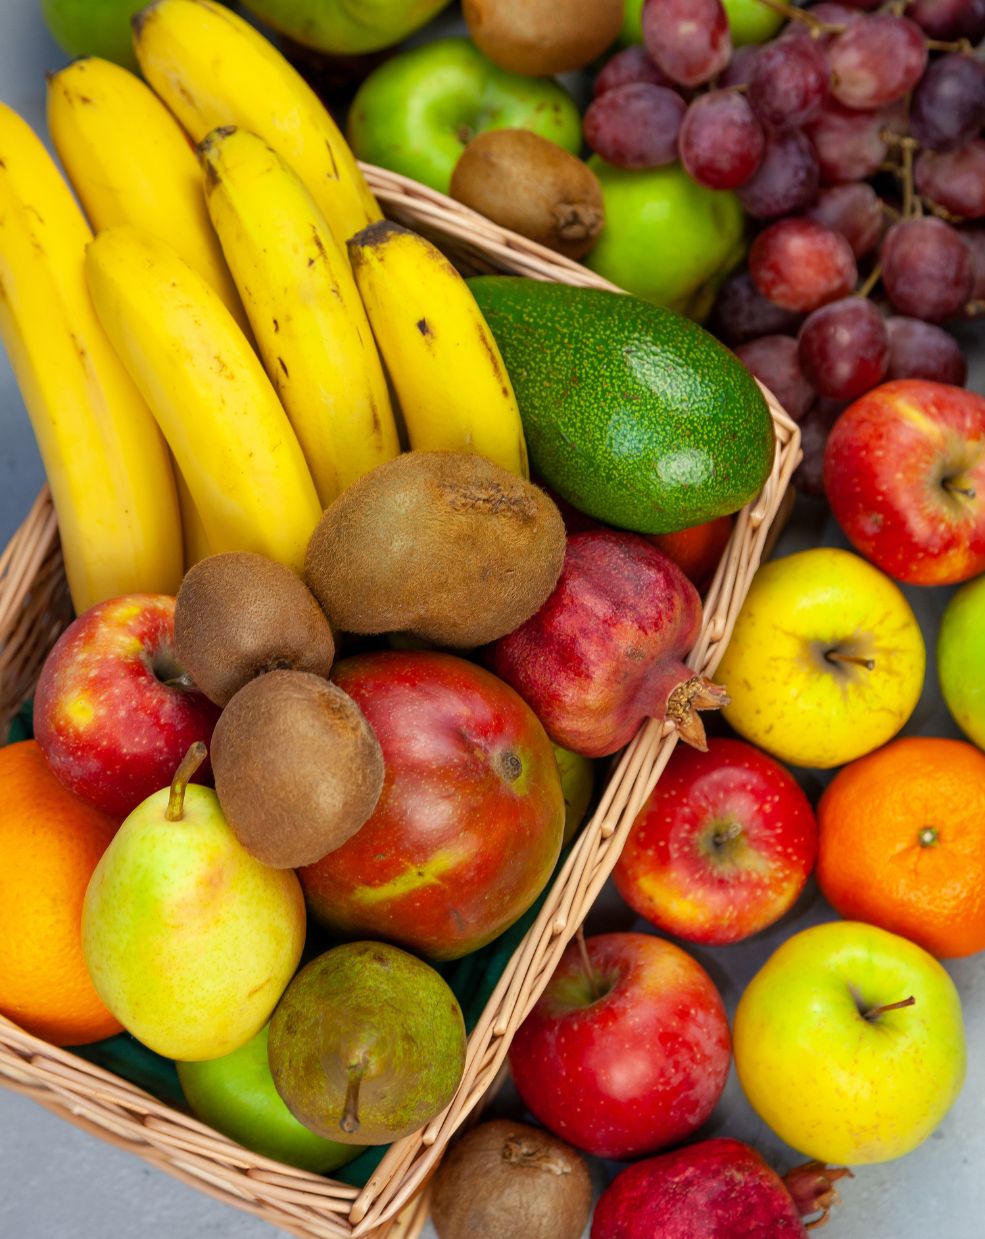 Top 5 Fruits to Treat Constipation, According to a Dietitian